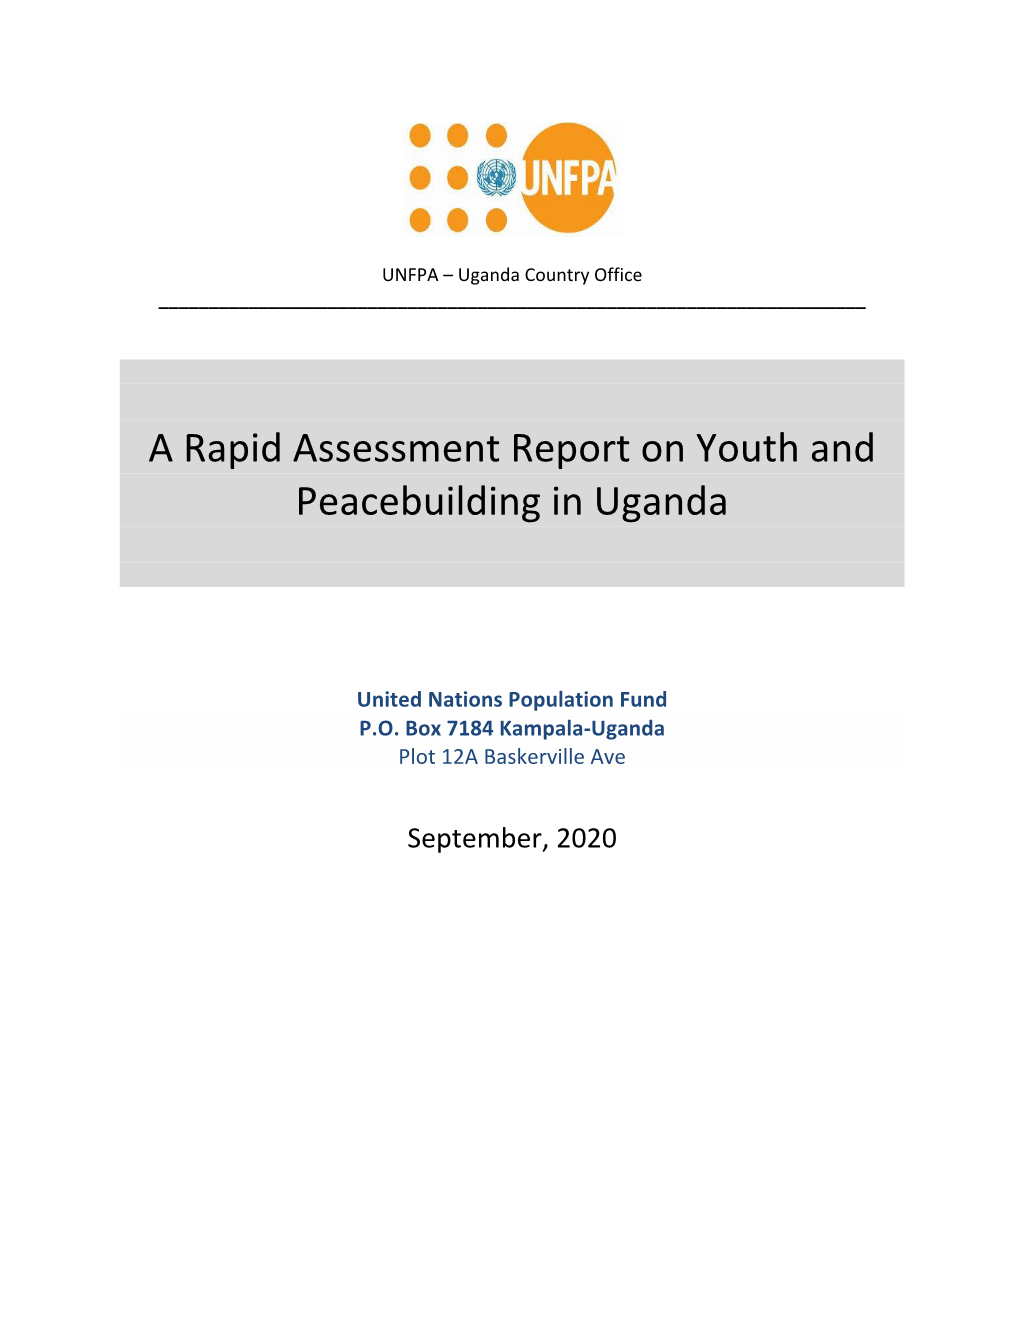 A Rapid Assessment Report on Youth and Peacebuilding in Uganda